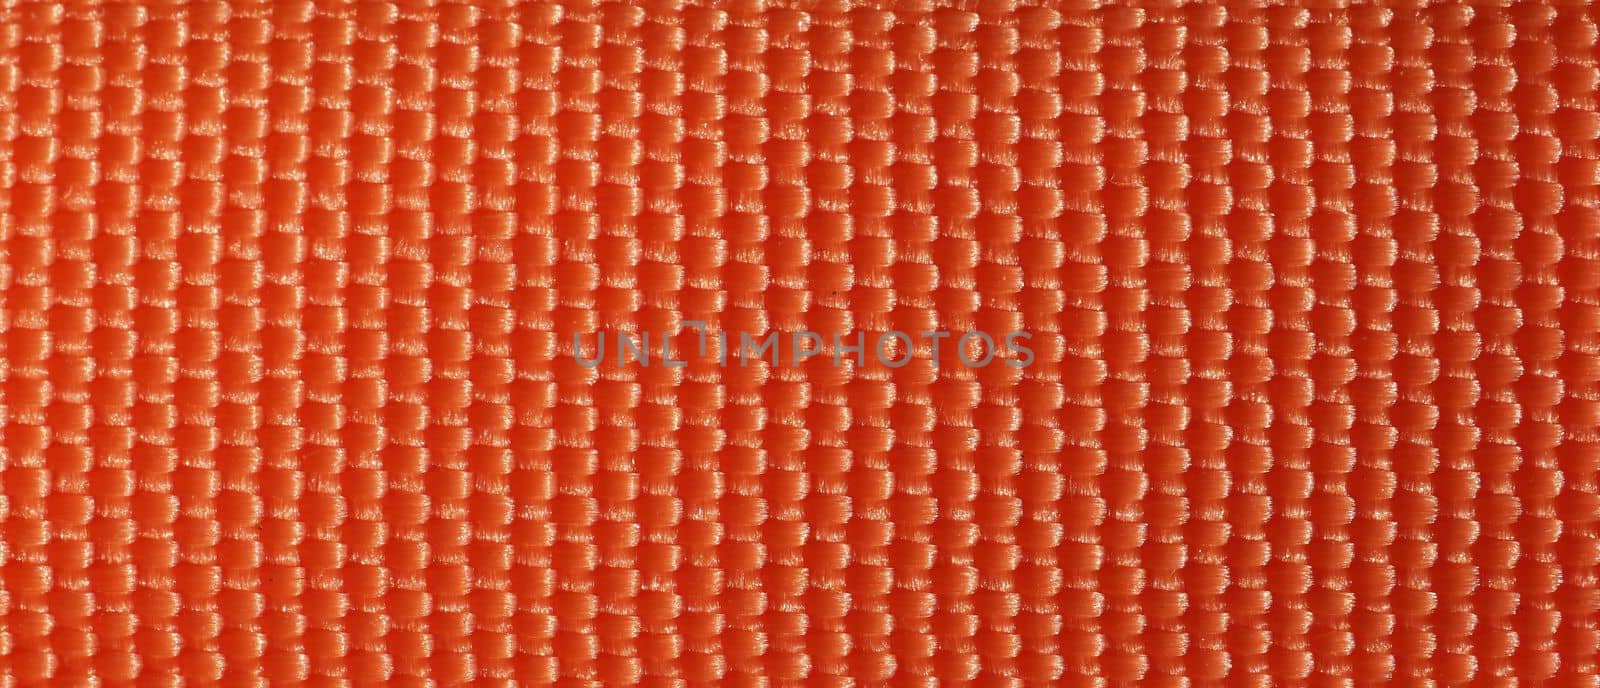 orange fabric texture useful as a background